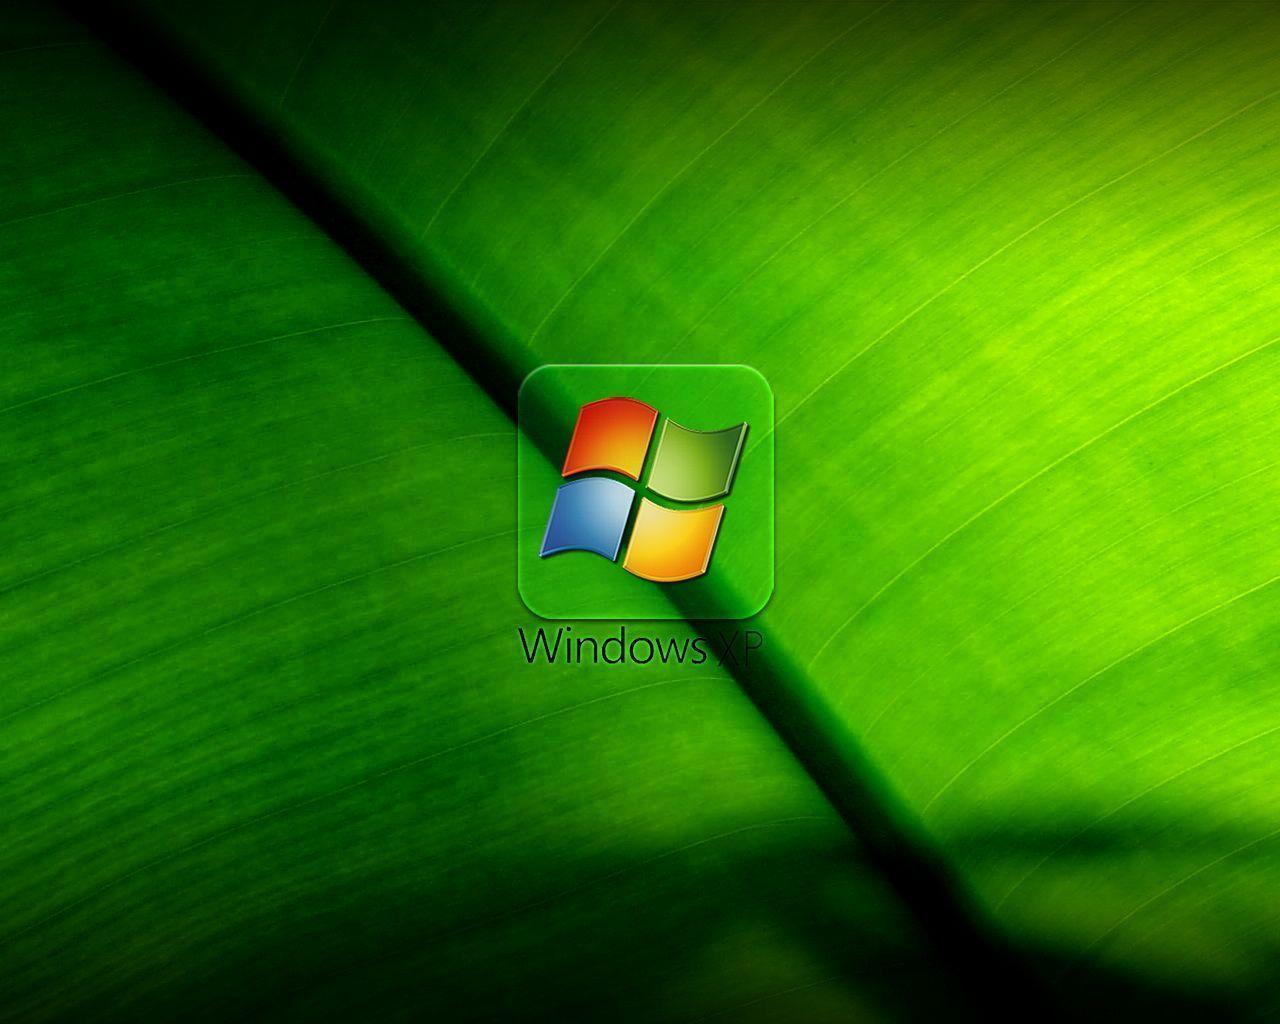 Windows xp image XP HD wallpaper and background photo